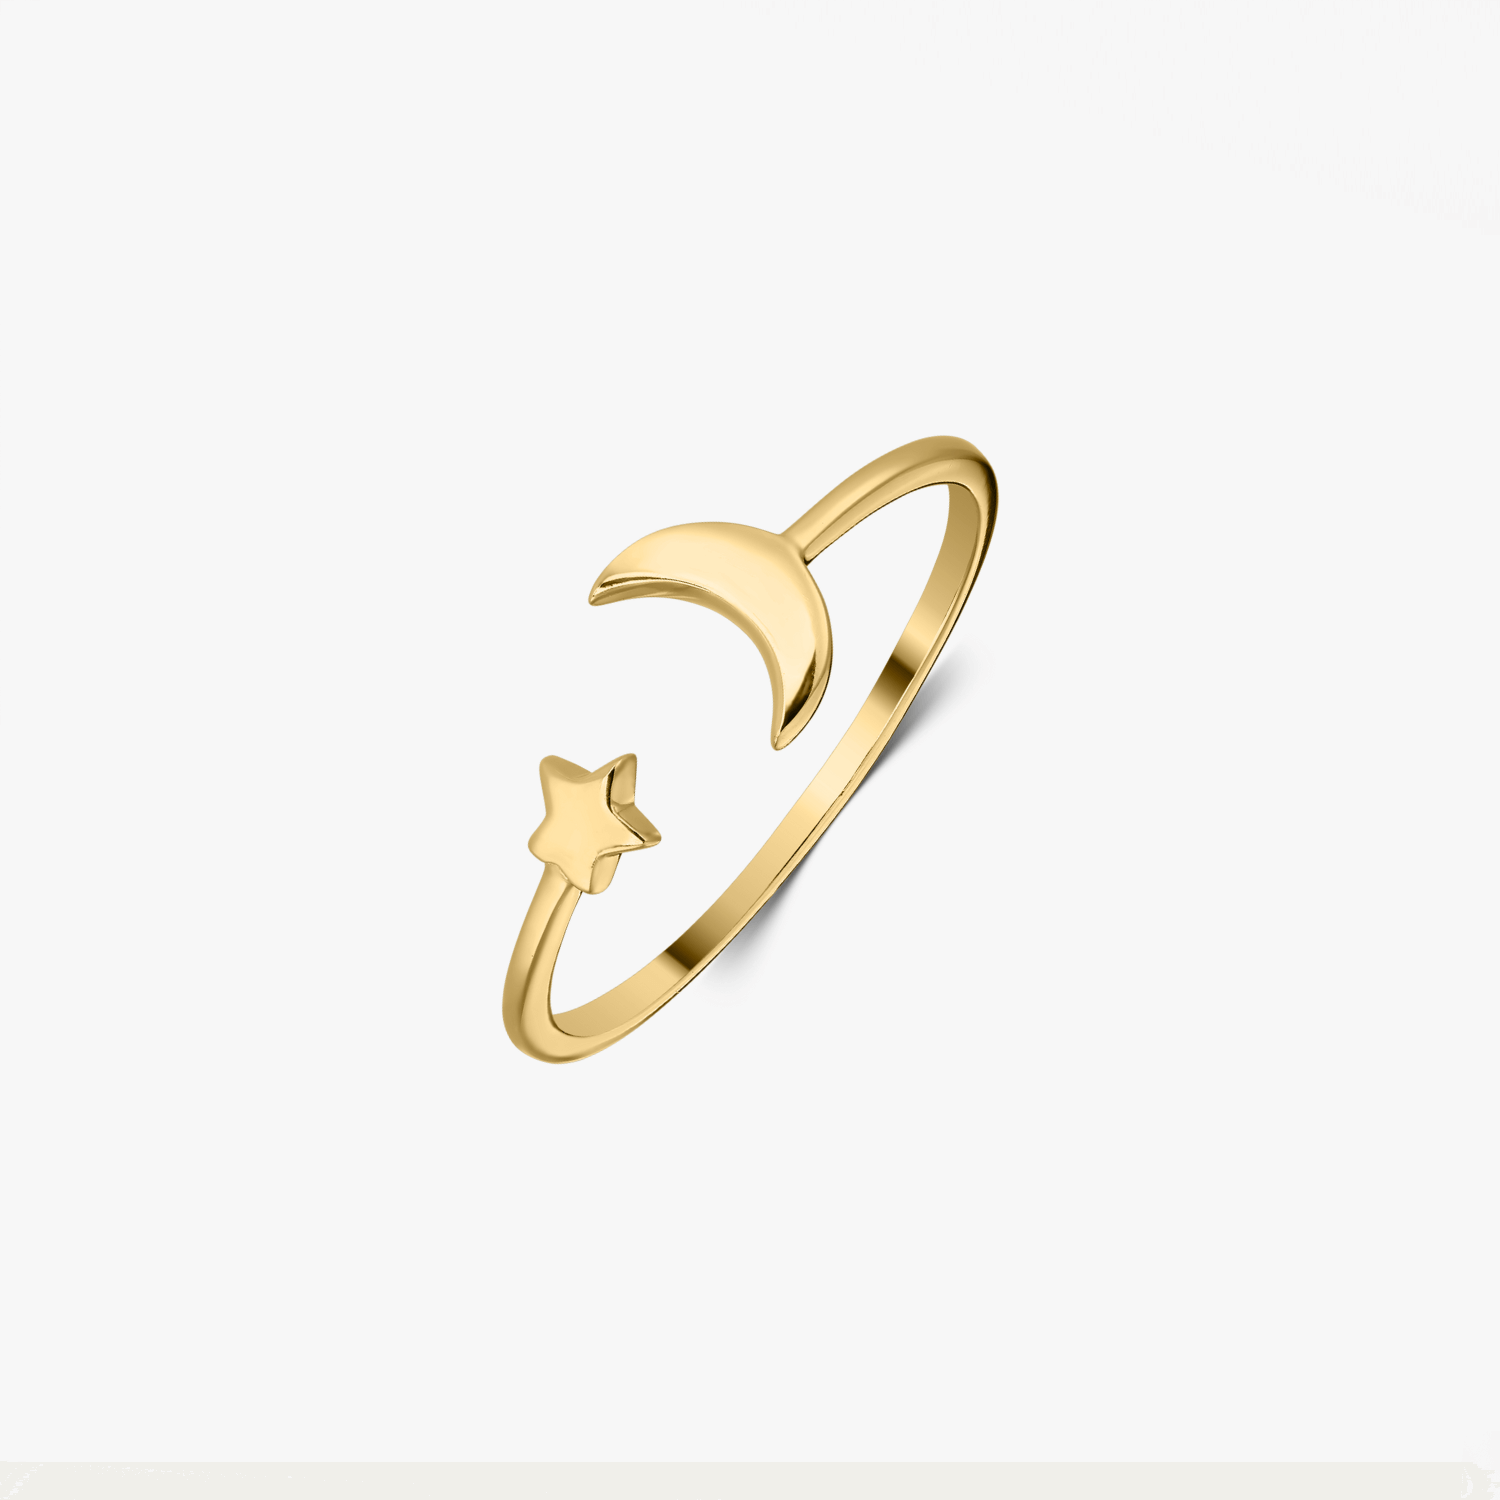 Gold Starry Night silver ring